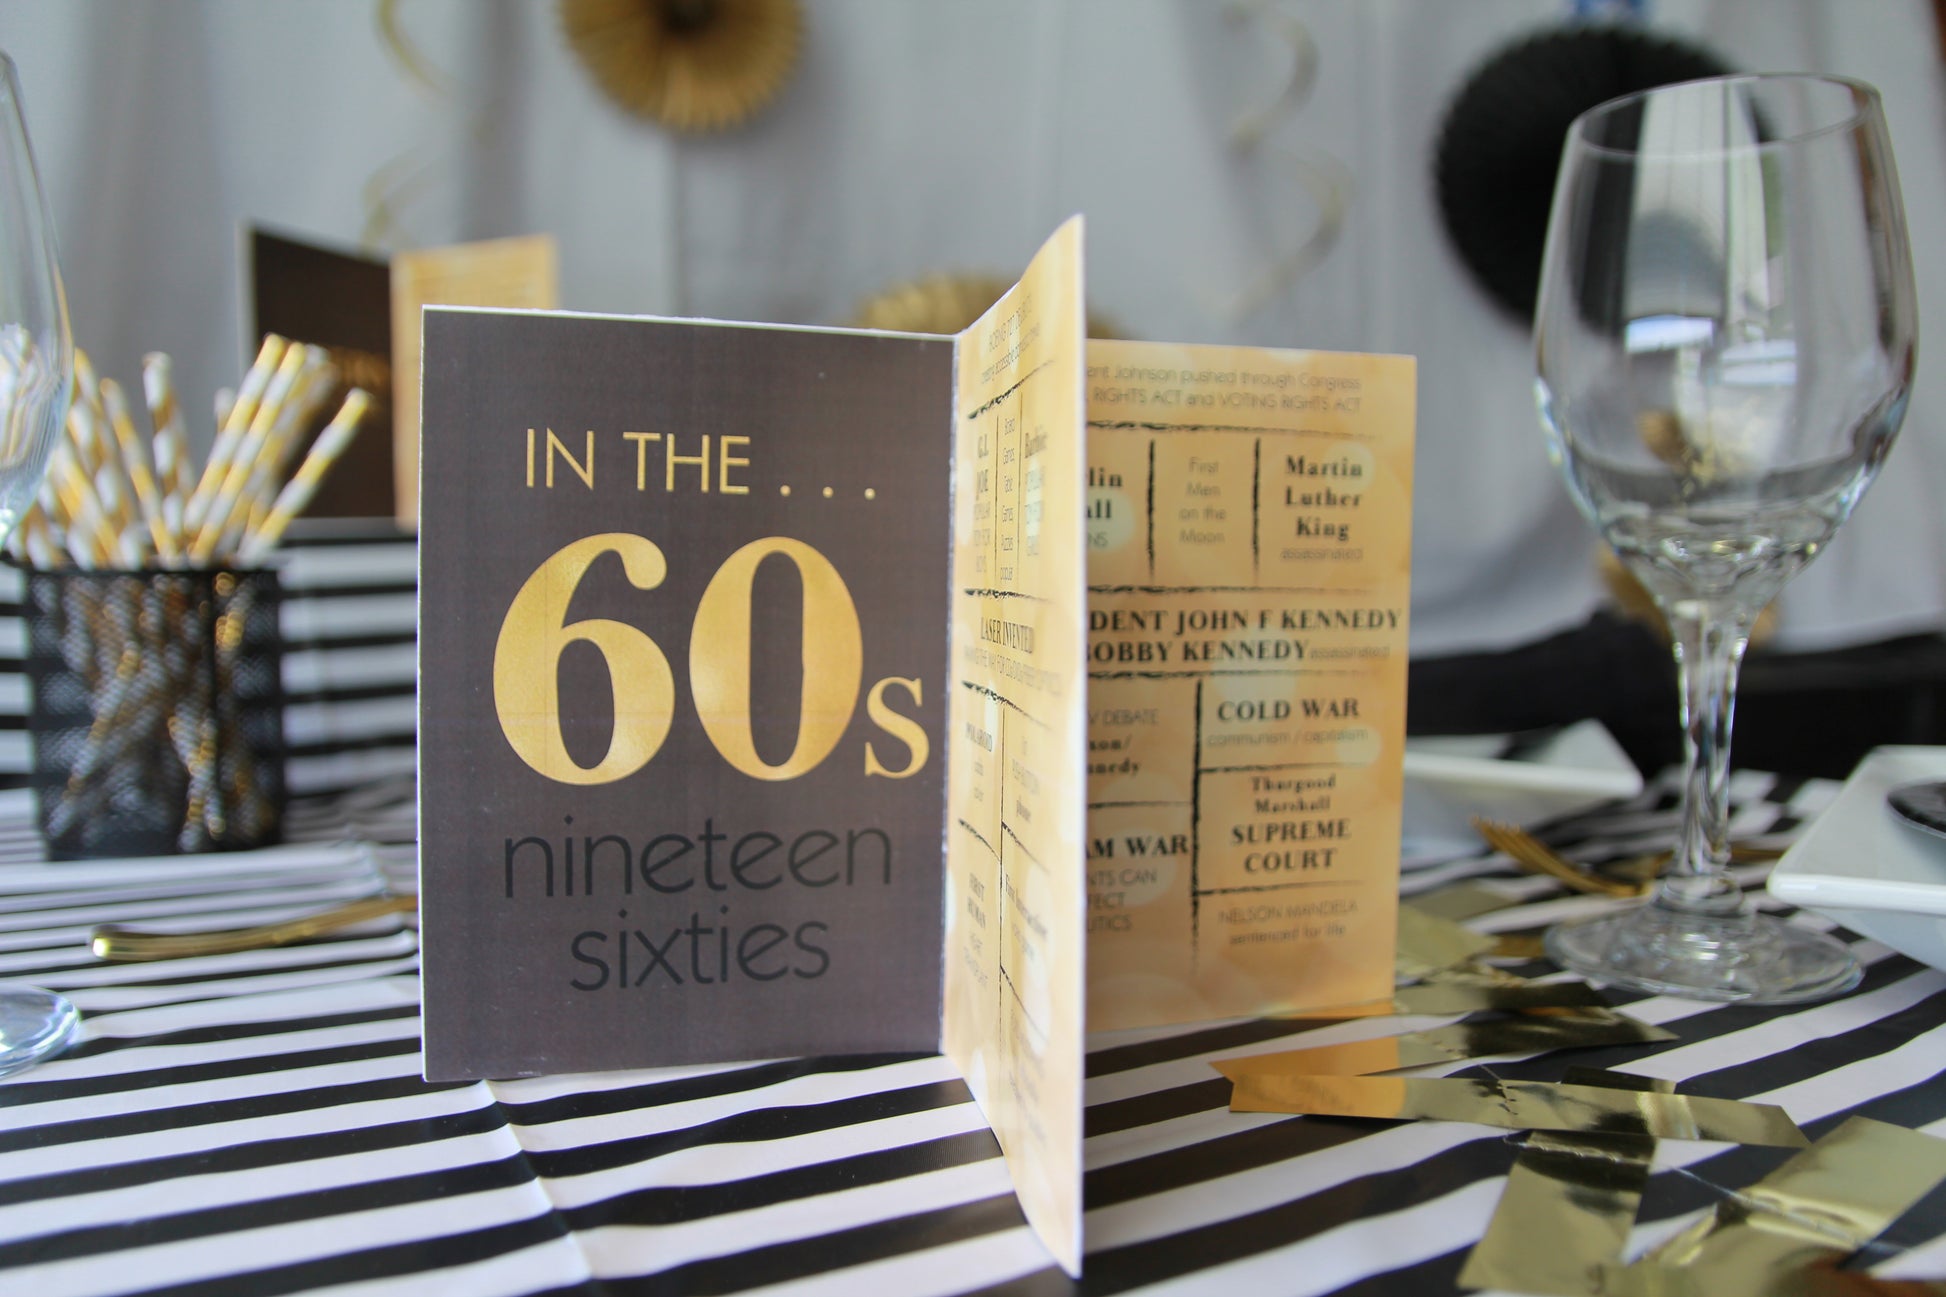 Black and gold table decor  Birthday party decorations, Black and gold  party decorations, Gold birthday party